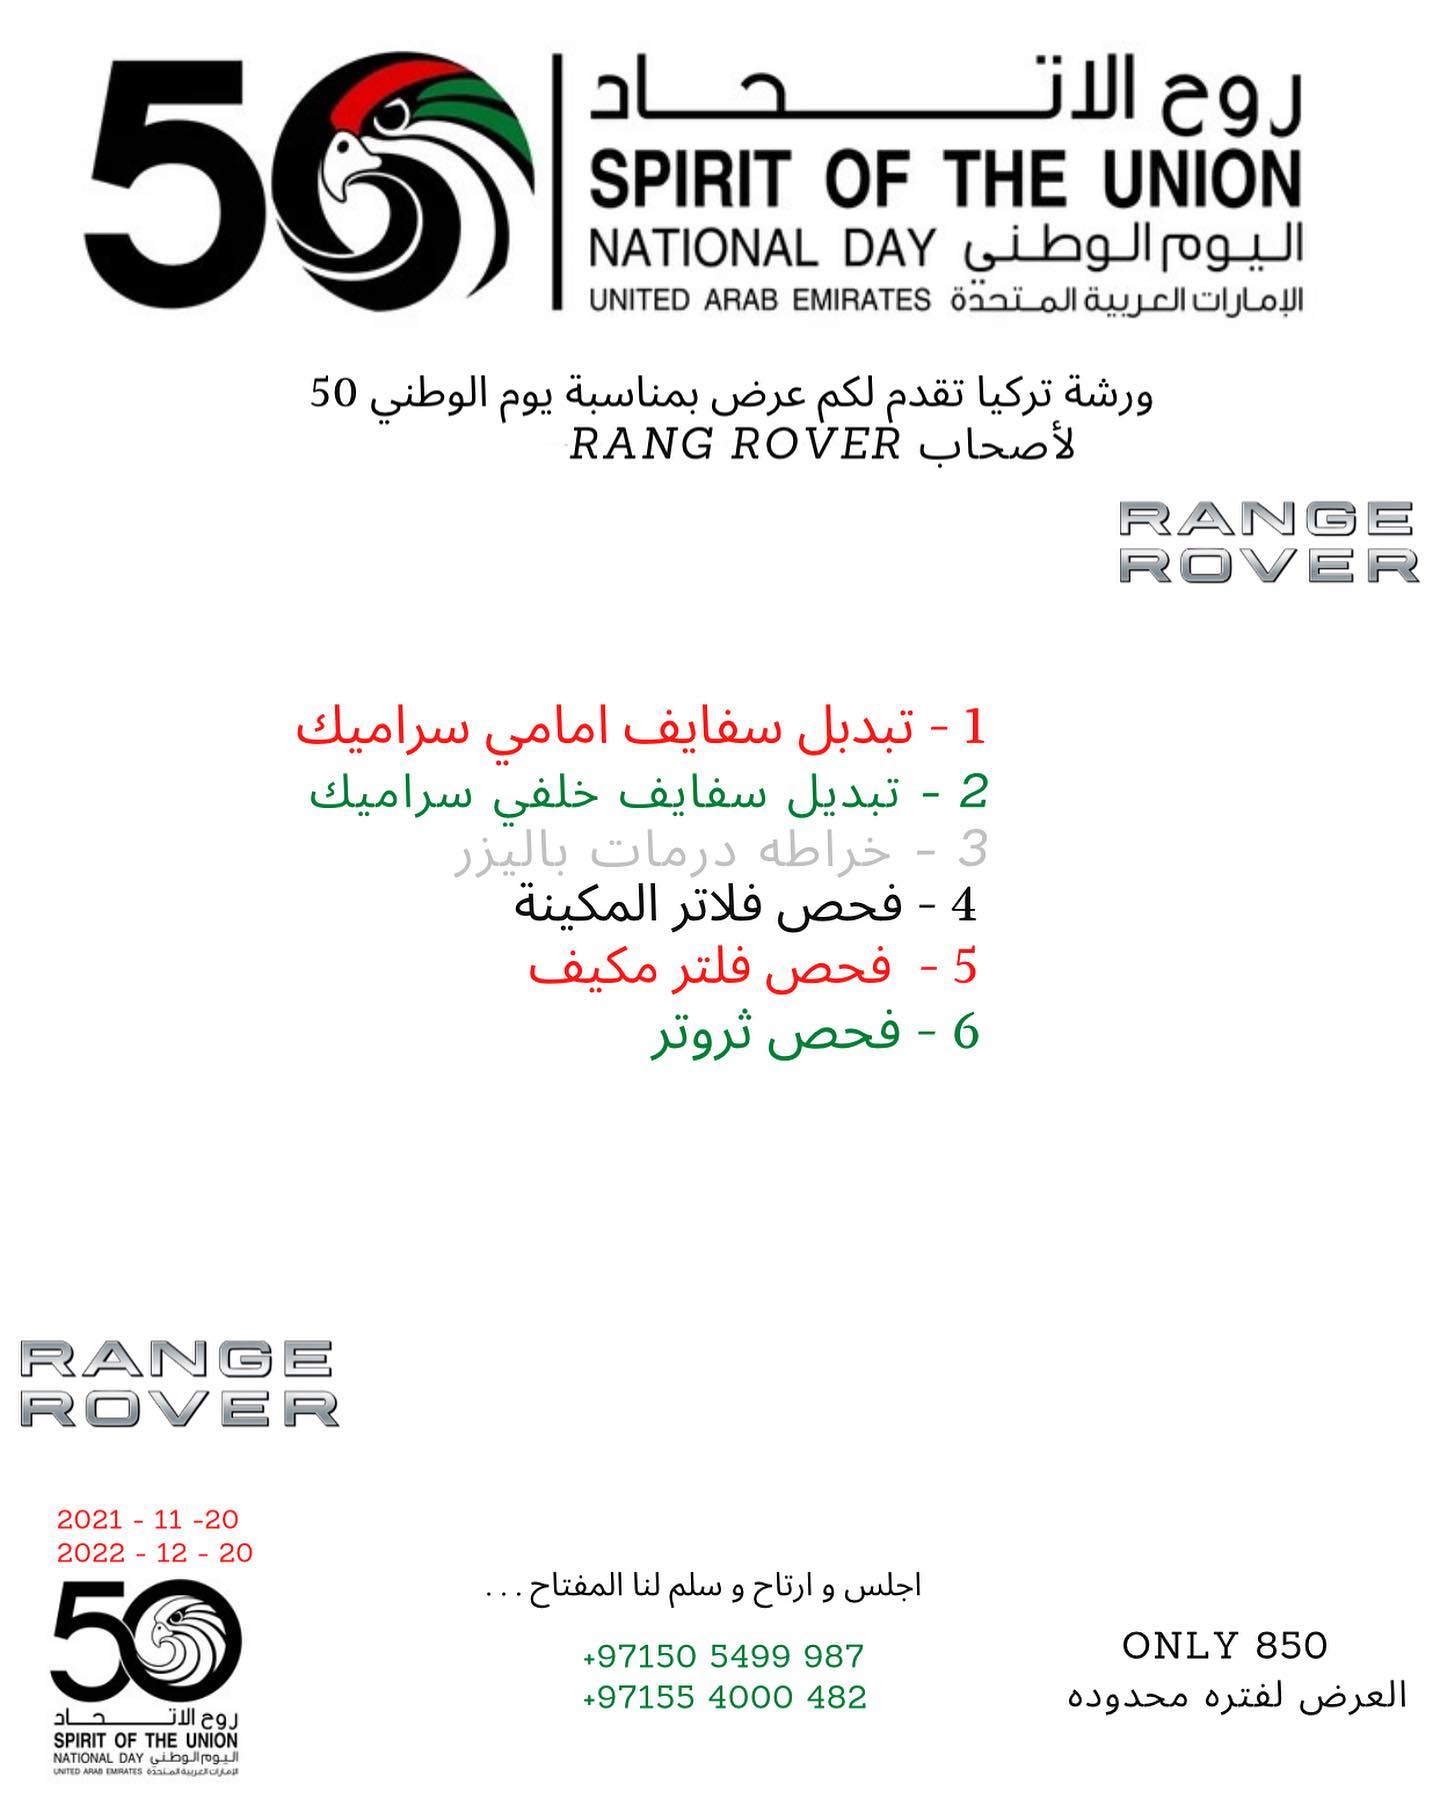 Land Rover Uae National Day Car Service Offer